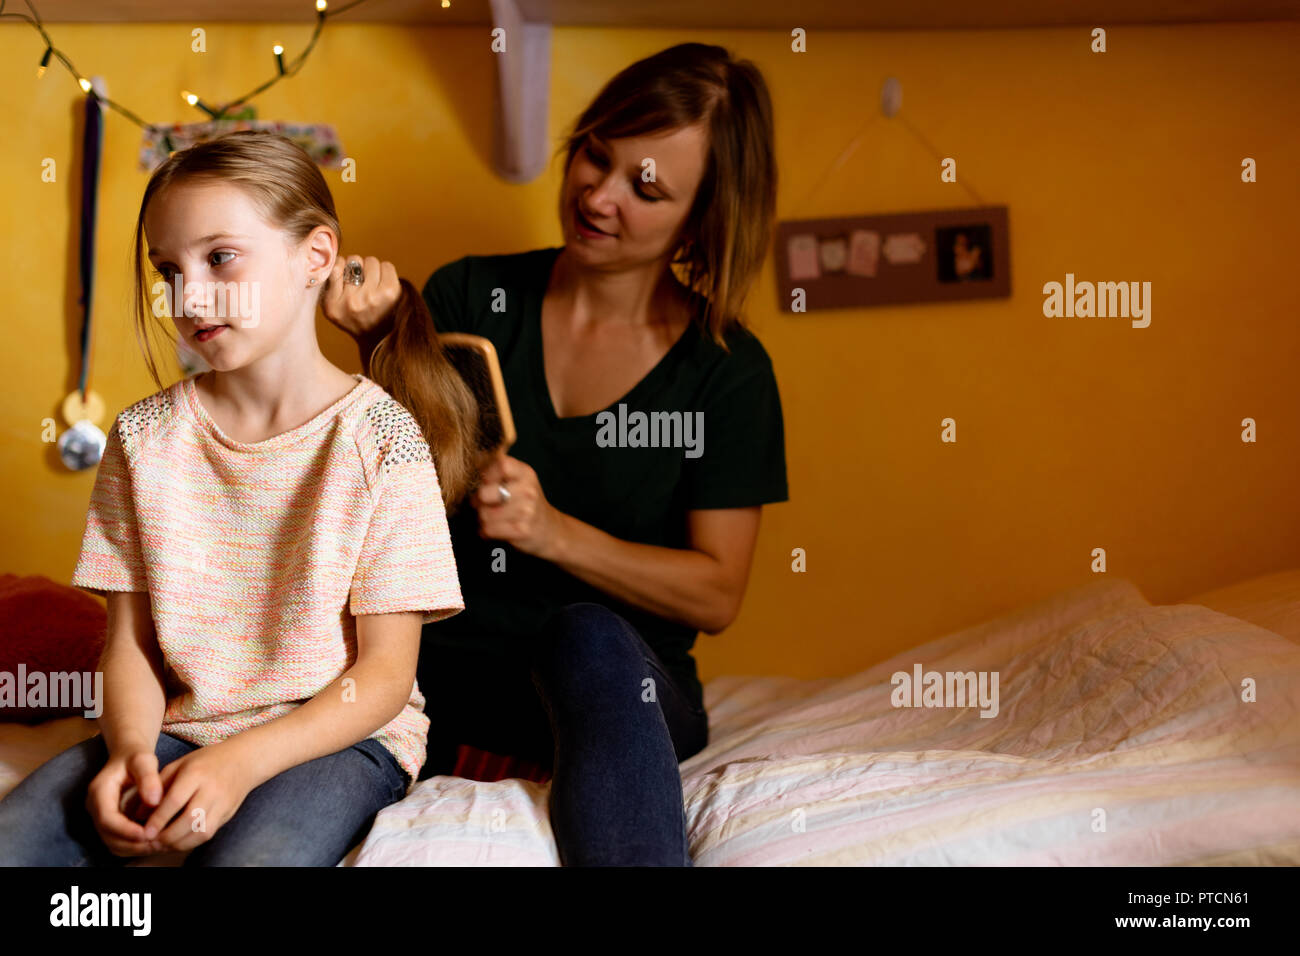 Mother combing daughters hair on bed Stock Photo